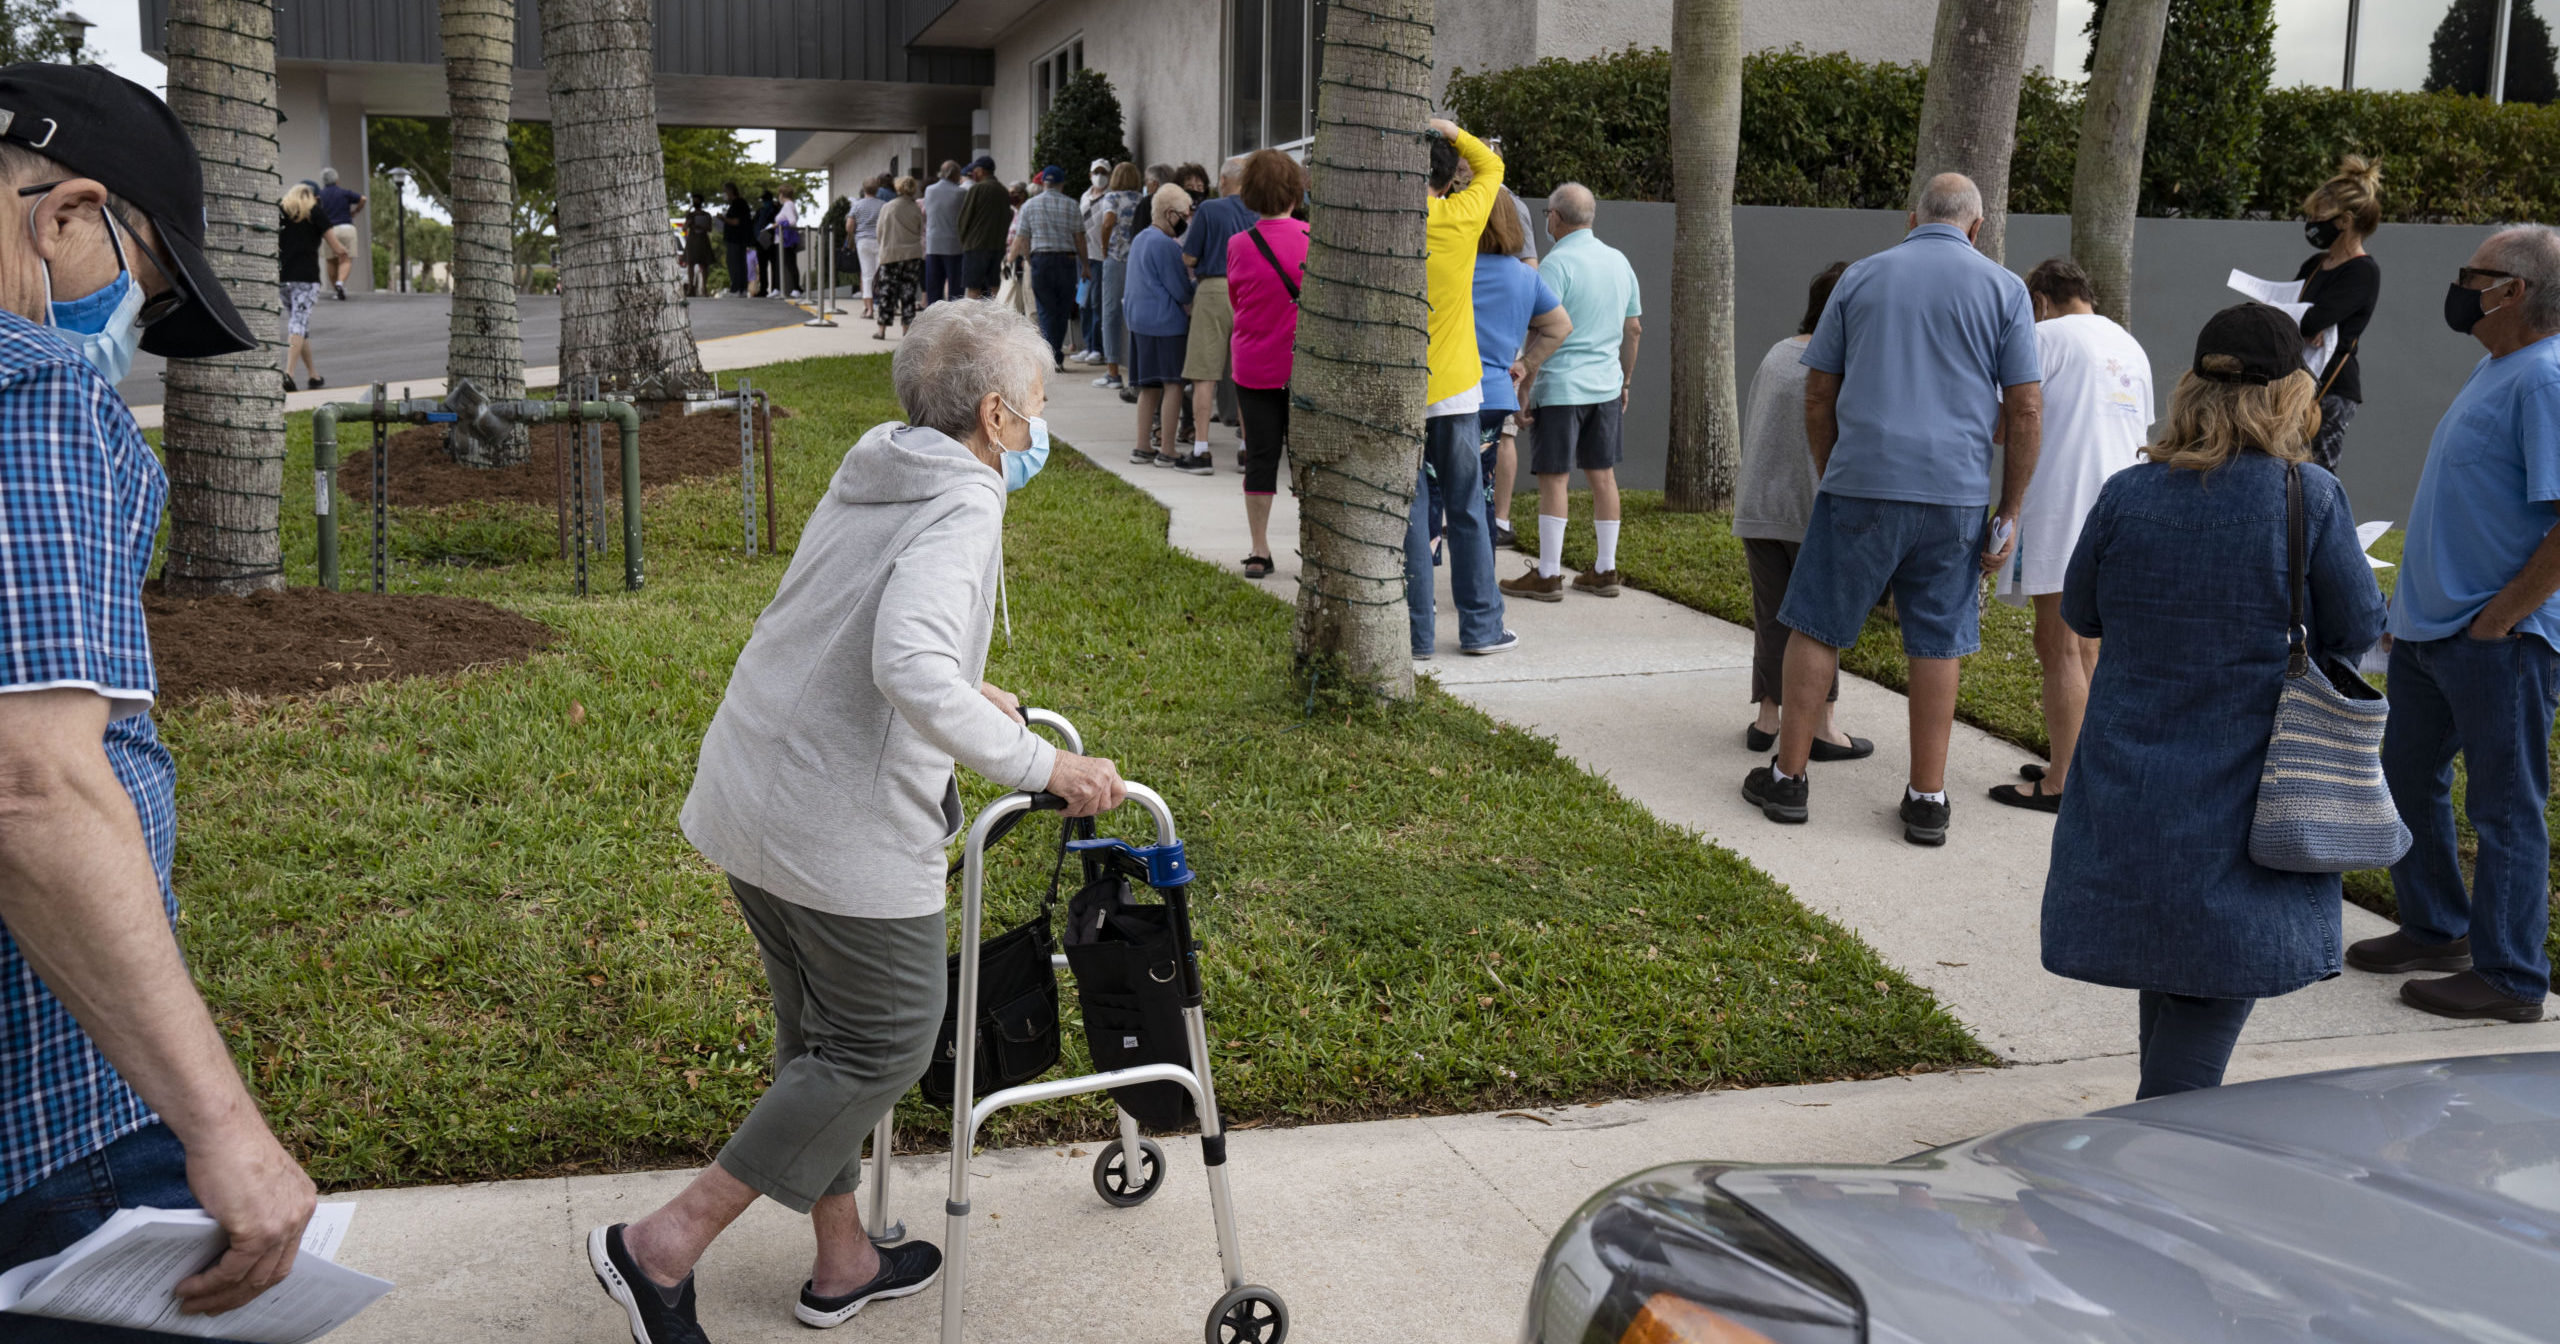 Seniors stand in line to make an appointment to receive the Moderna COVID-19 vaccine outside the King's Point clubhouse in Delray Beach, Florida, on Dec. 30, 2020.